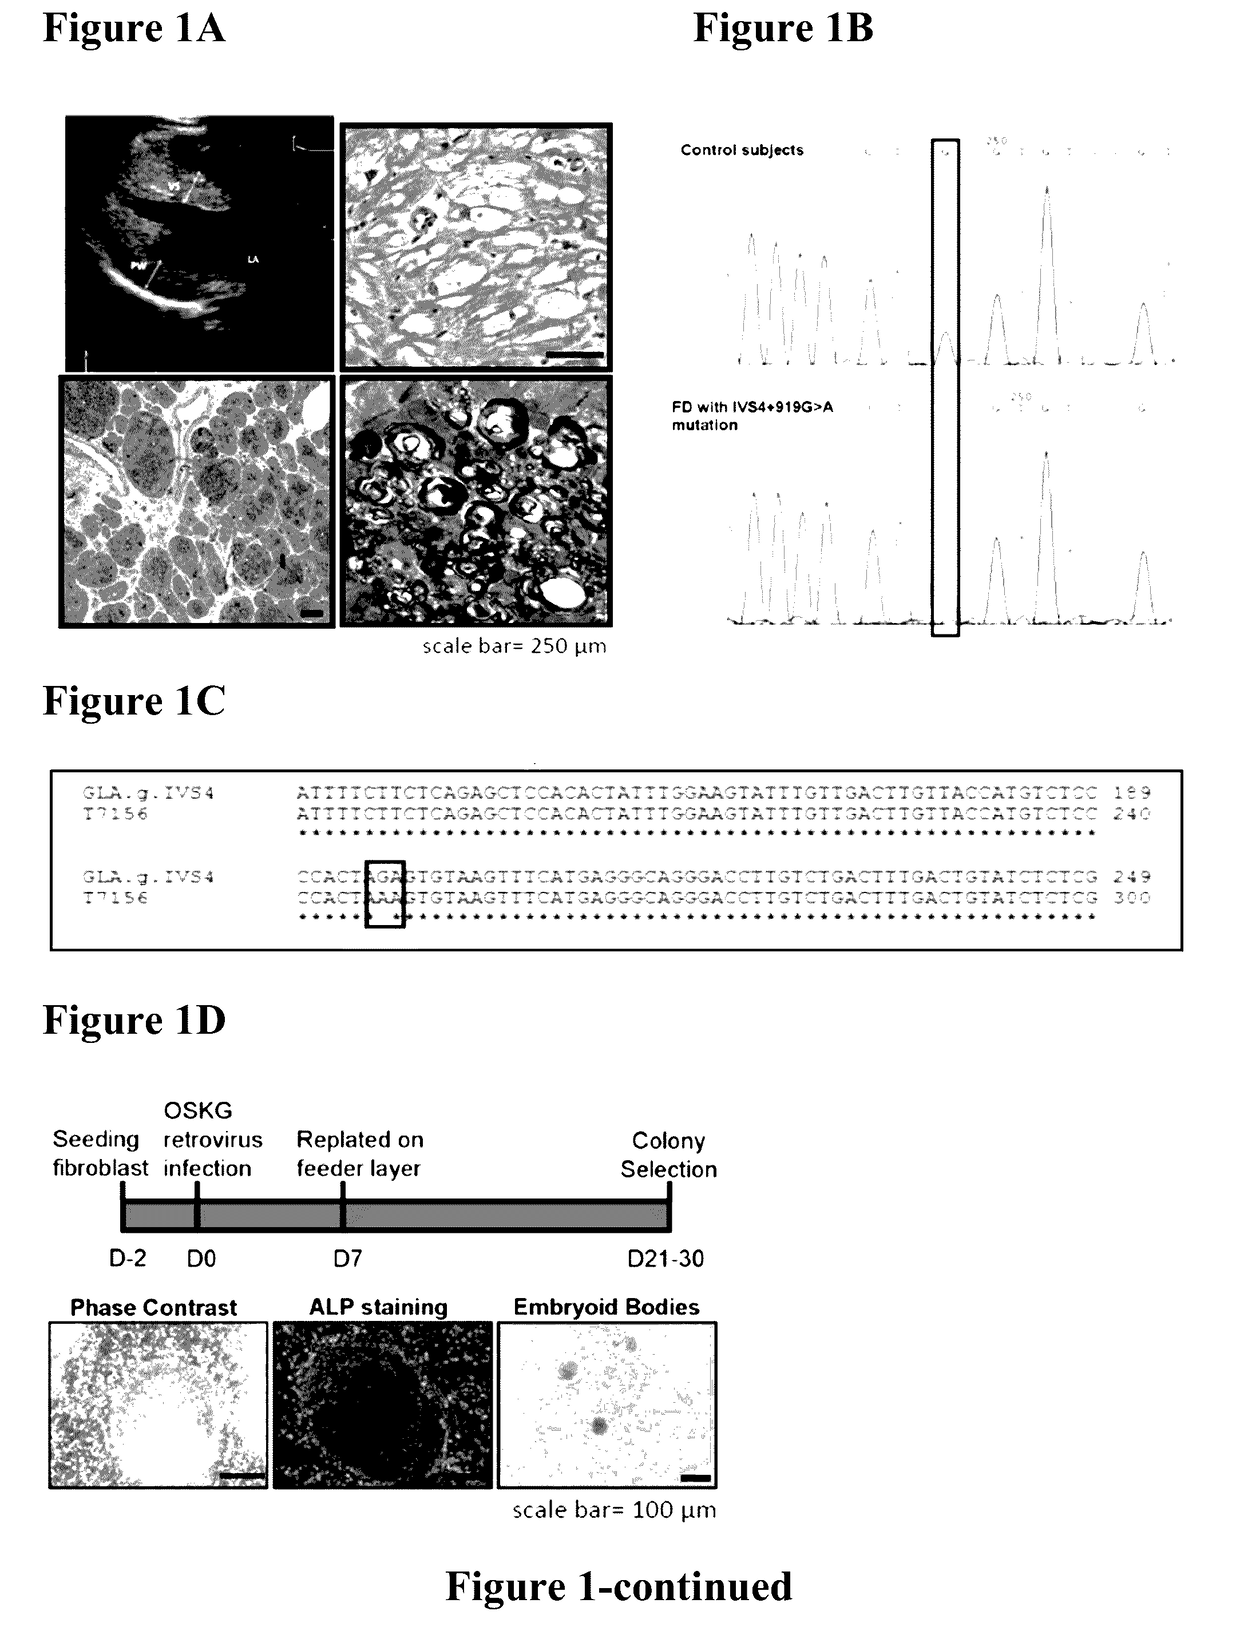 Method for preparing induced pluripotent stem cells